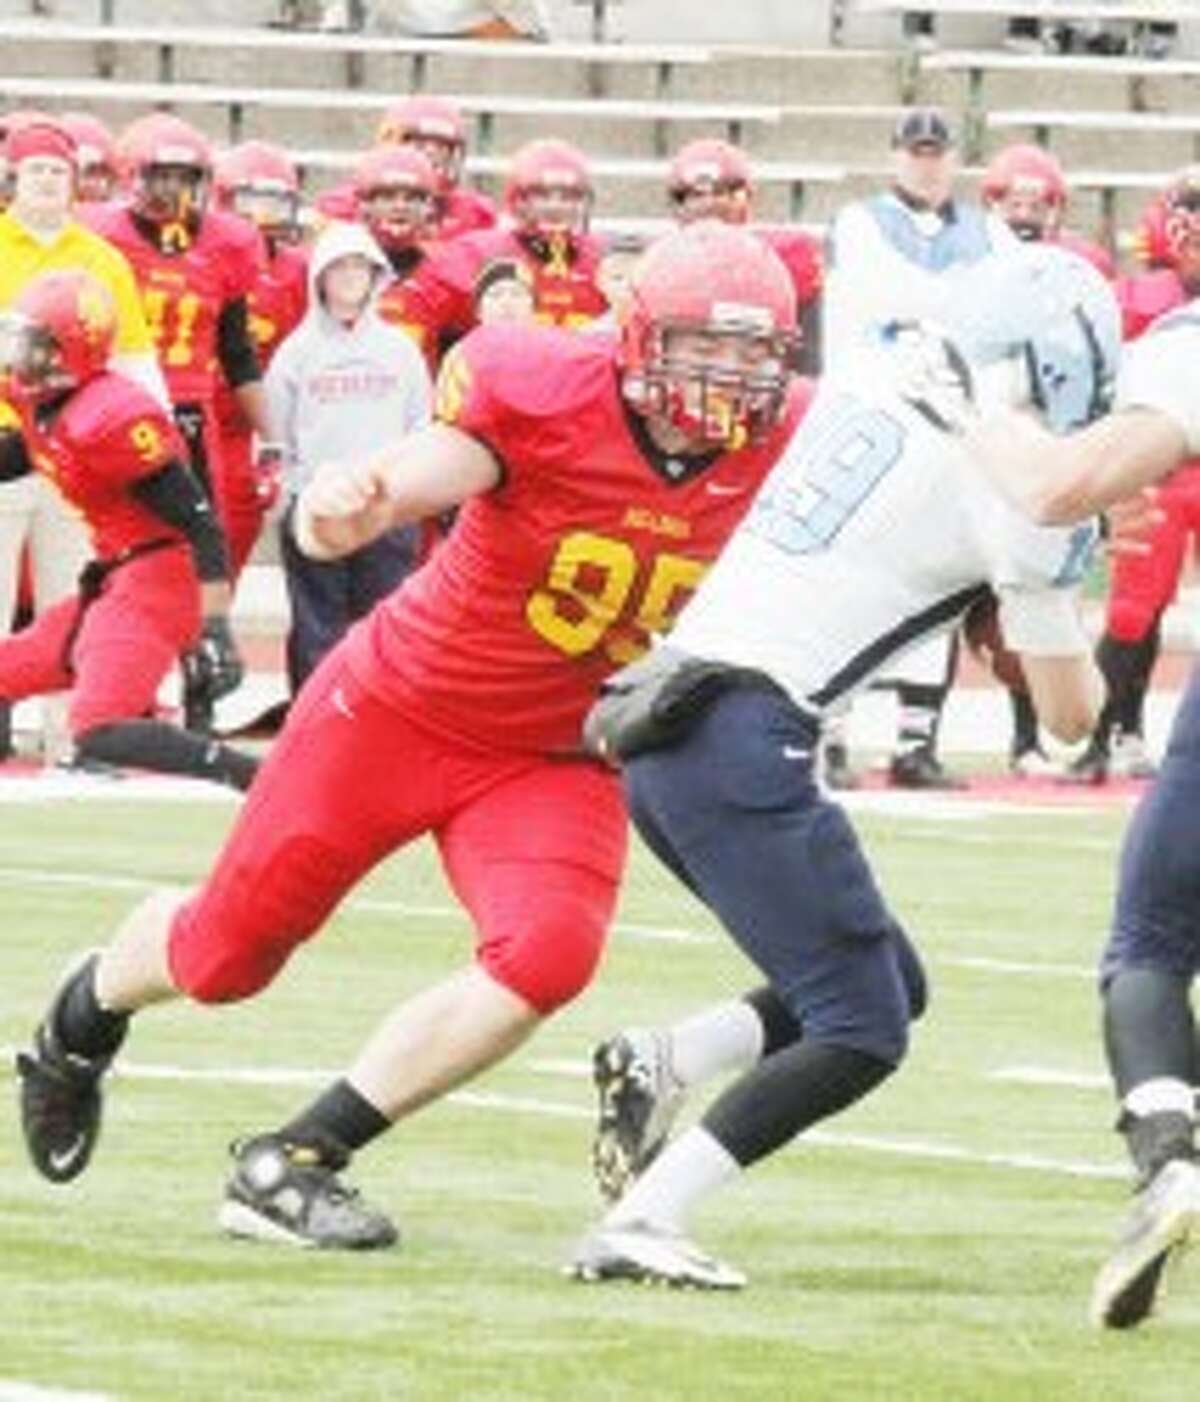 IMPOSING PRESENCE: Former Ferris State defensive end Brad Iskow (95) is preparing for the NFL draft by participating in a pre-combine training program in Indianapolis, Ind. Iskow will participate in a pro day at Grand Valley State University on March 11. (Pioneer file photo)